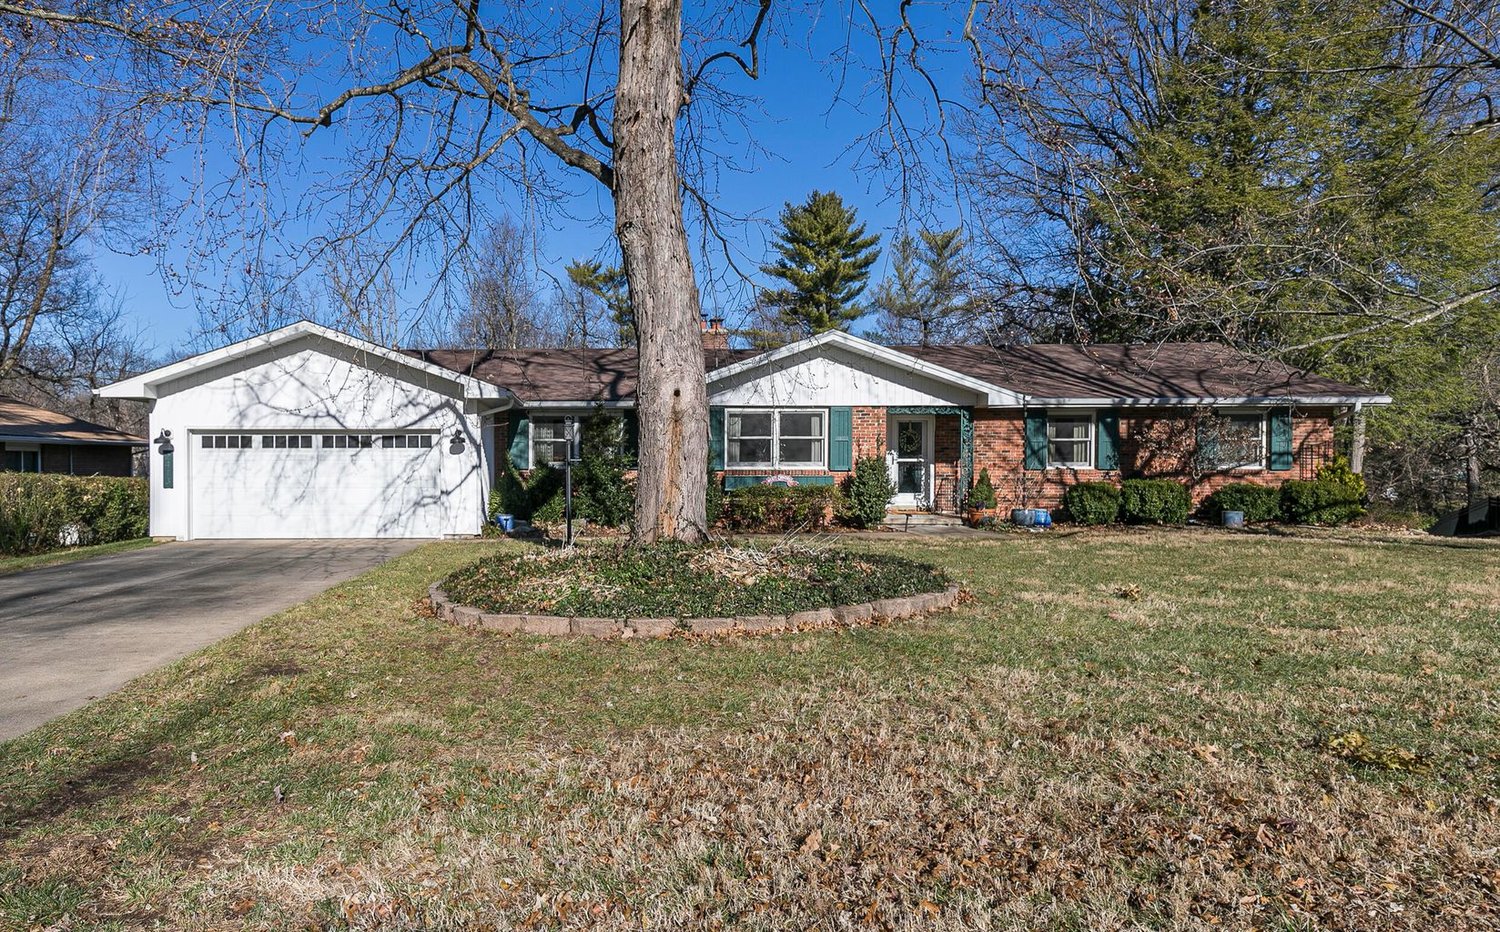 2413 S. Claremont Circle
$549,000
Bedrooms: 4
Bathrooms: 3
Listing firm: Keller Williams Greater Springfield